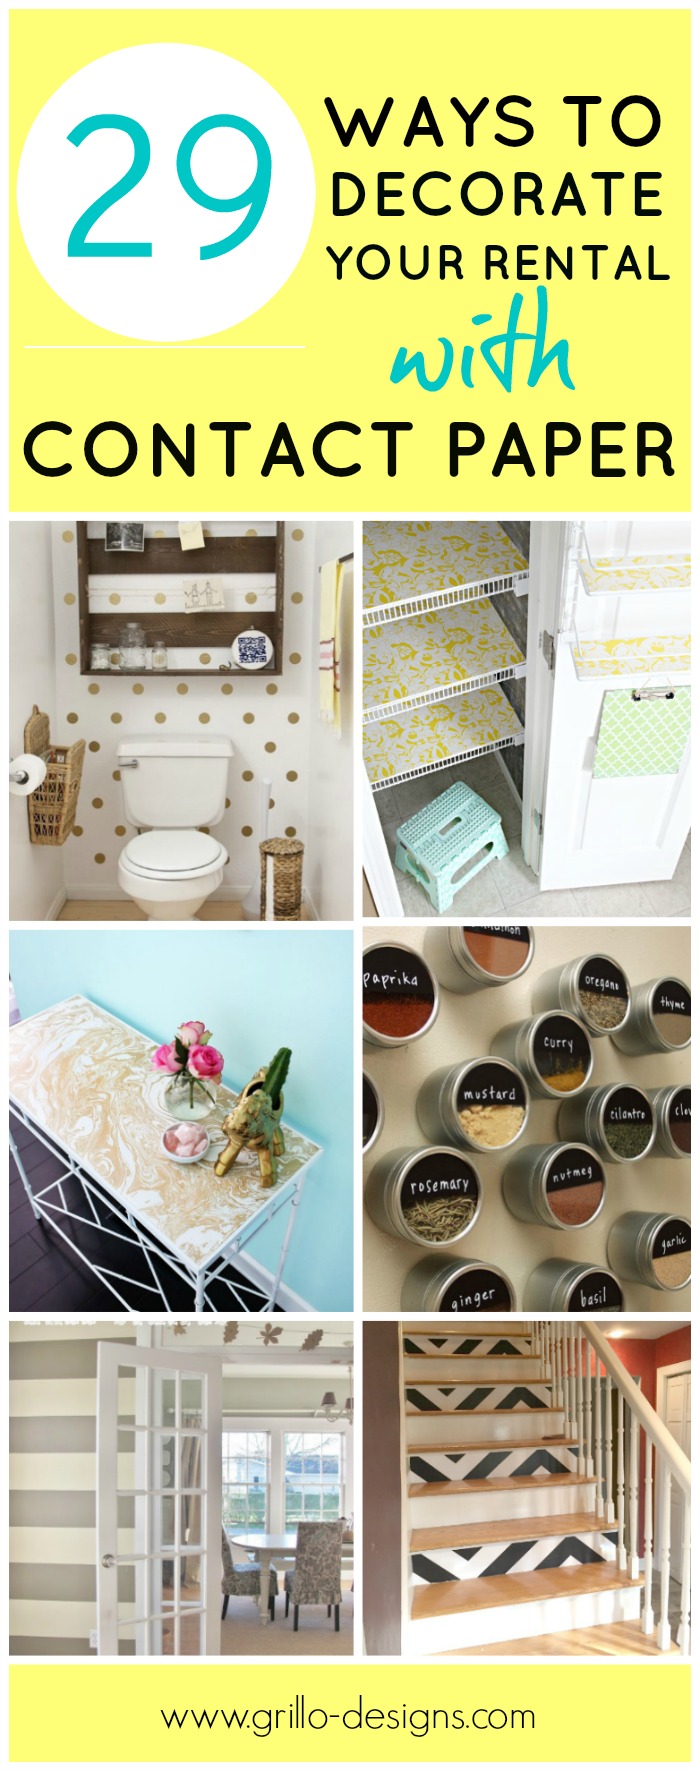 29 ways to decorate your rental with contact paper